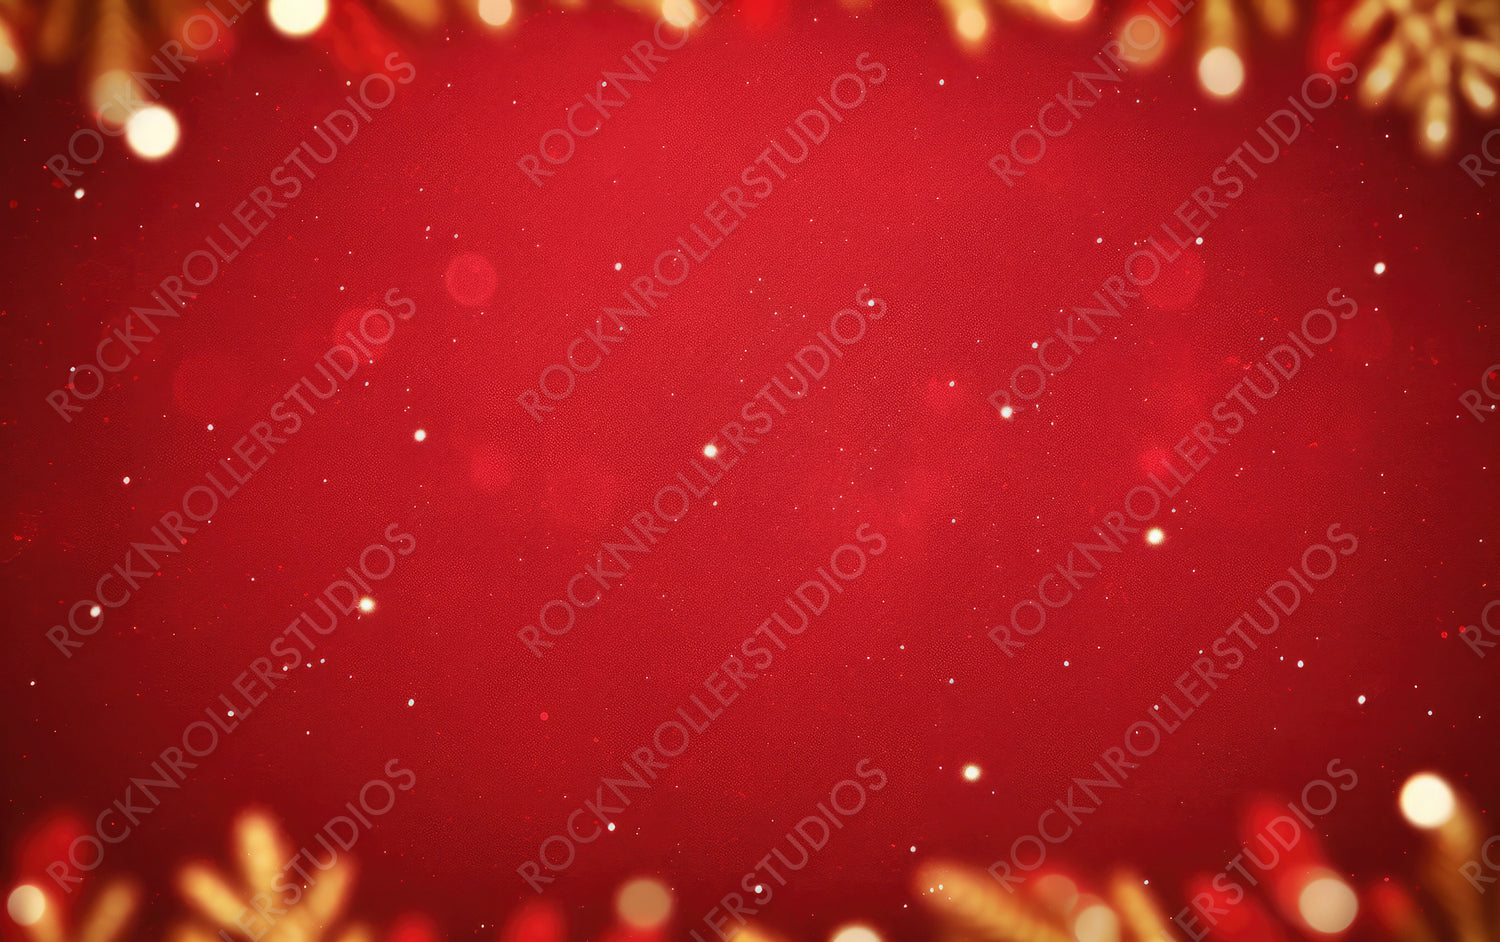 Christmas Background with Xmas Tree and Sparkle Bokeh Lights on Red Canvas Background. Merry Christmas Card. Winter Holiday Theme. Happy New Year. Space For Text